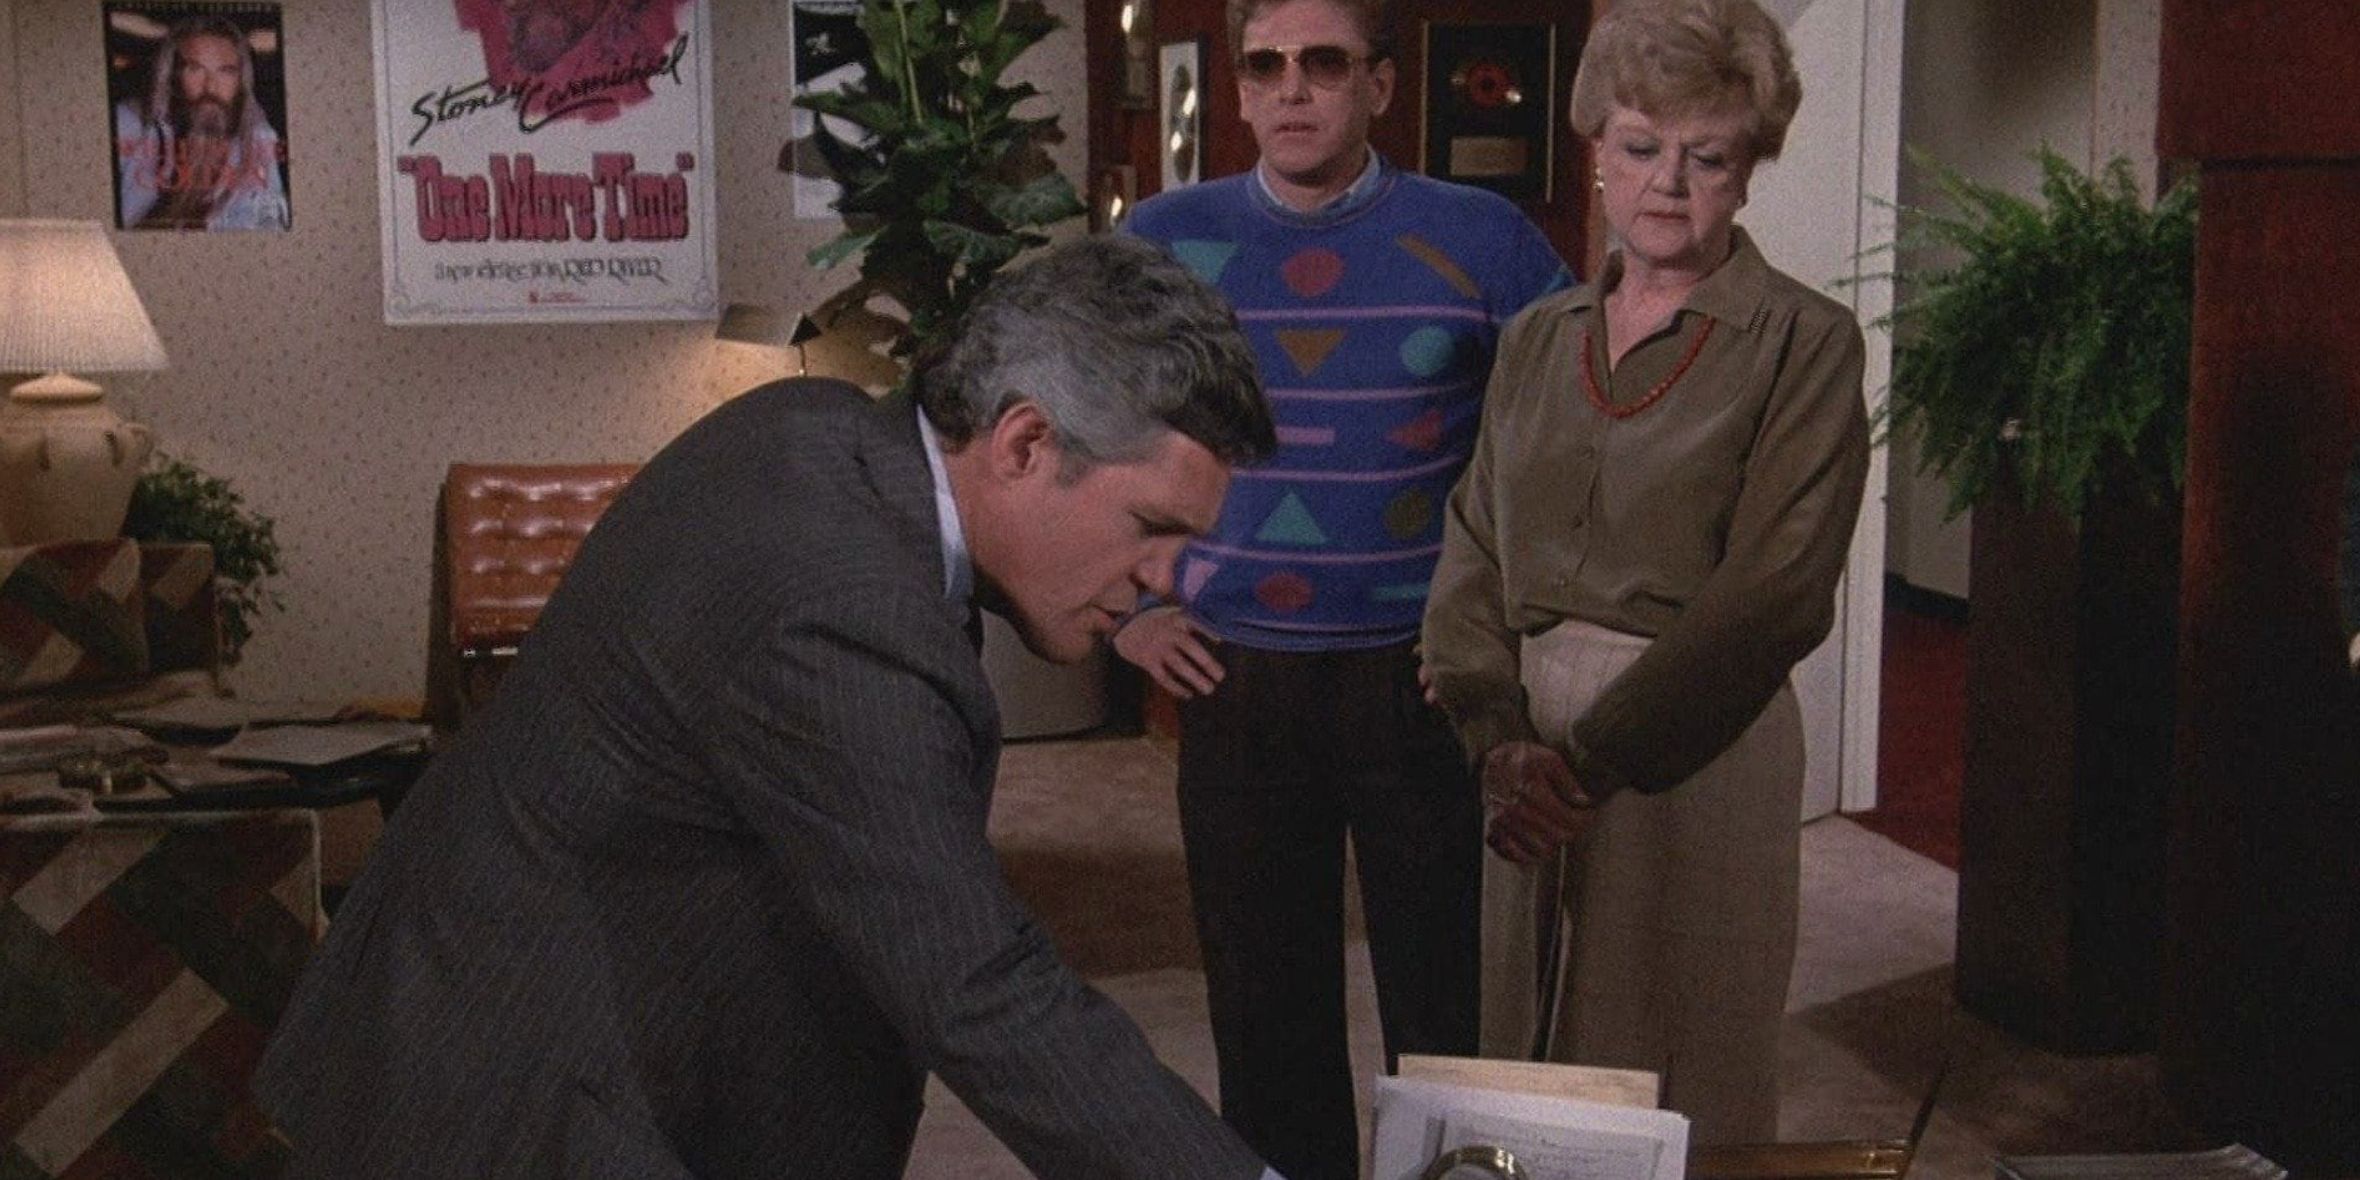 Jessica talking to a detective in the Murder, She Wrote episode "Murder, She Spoke"